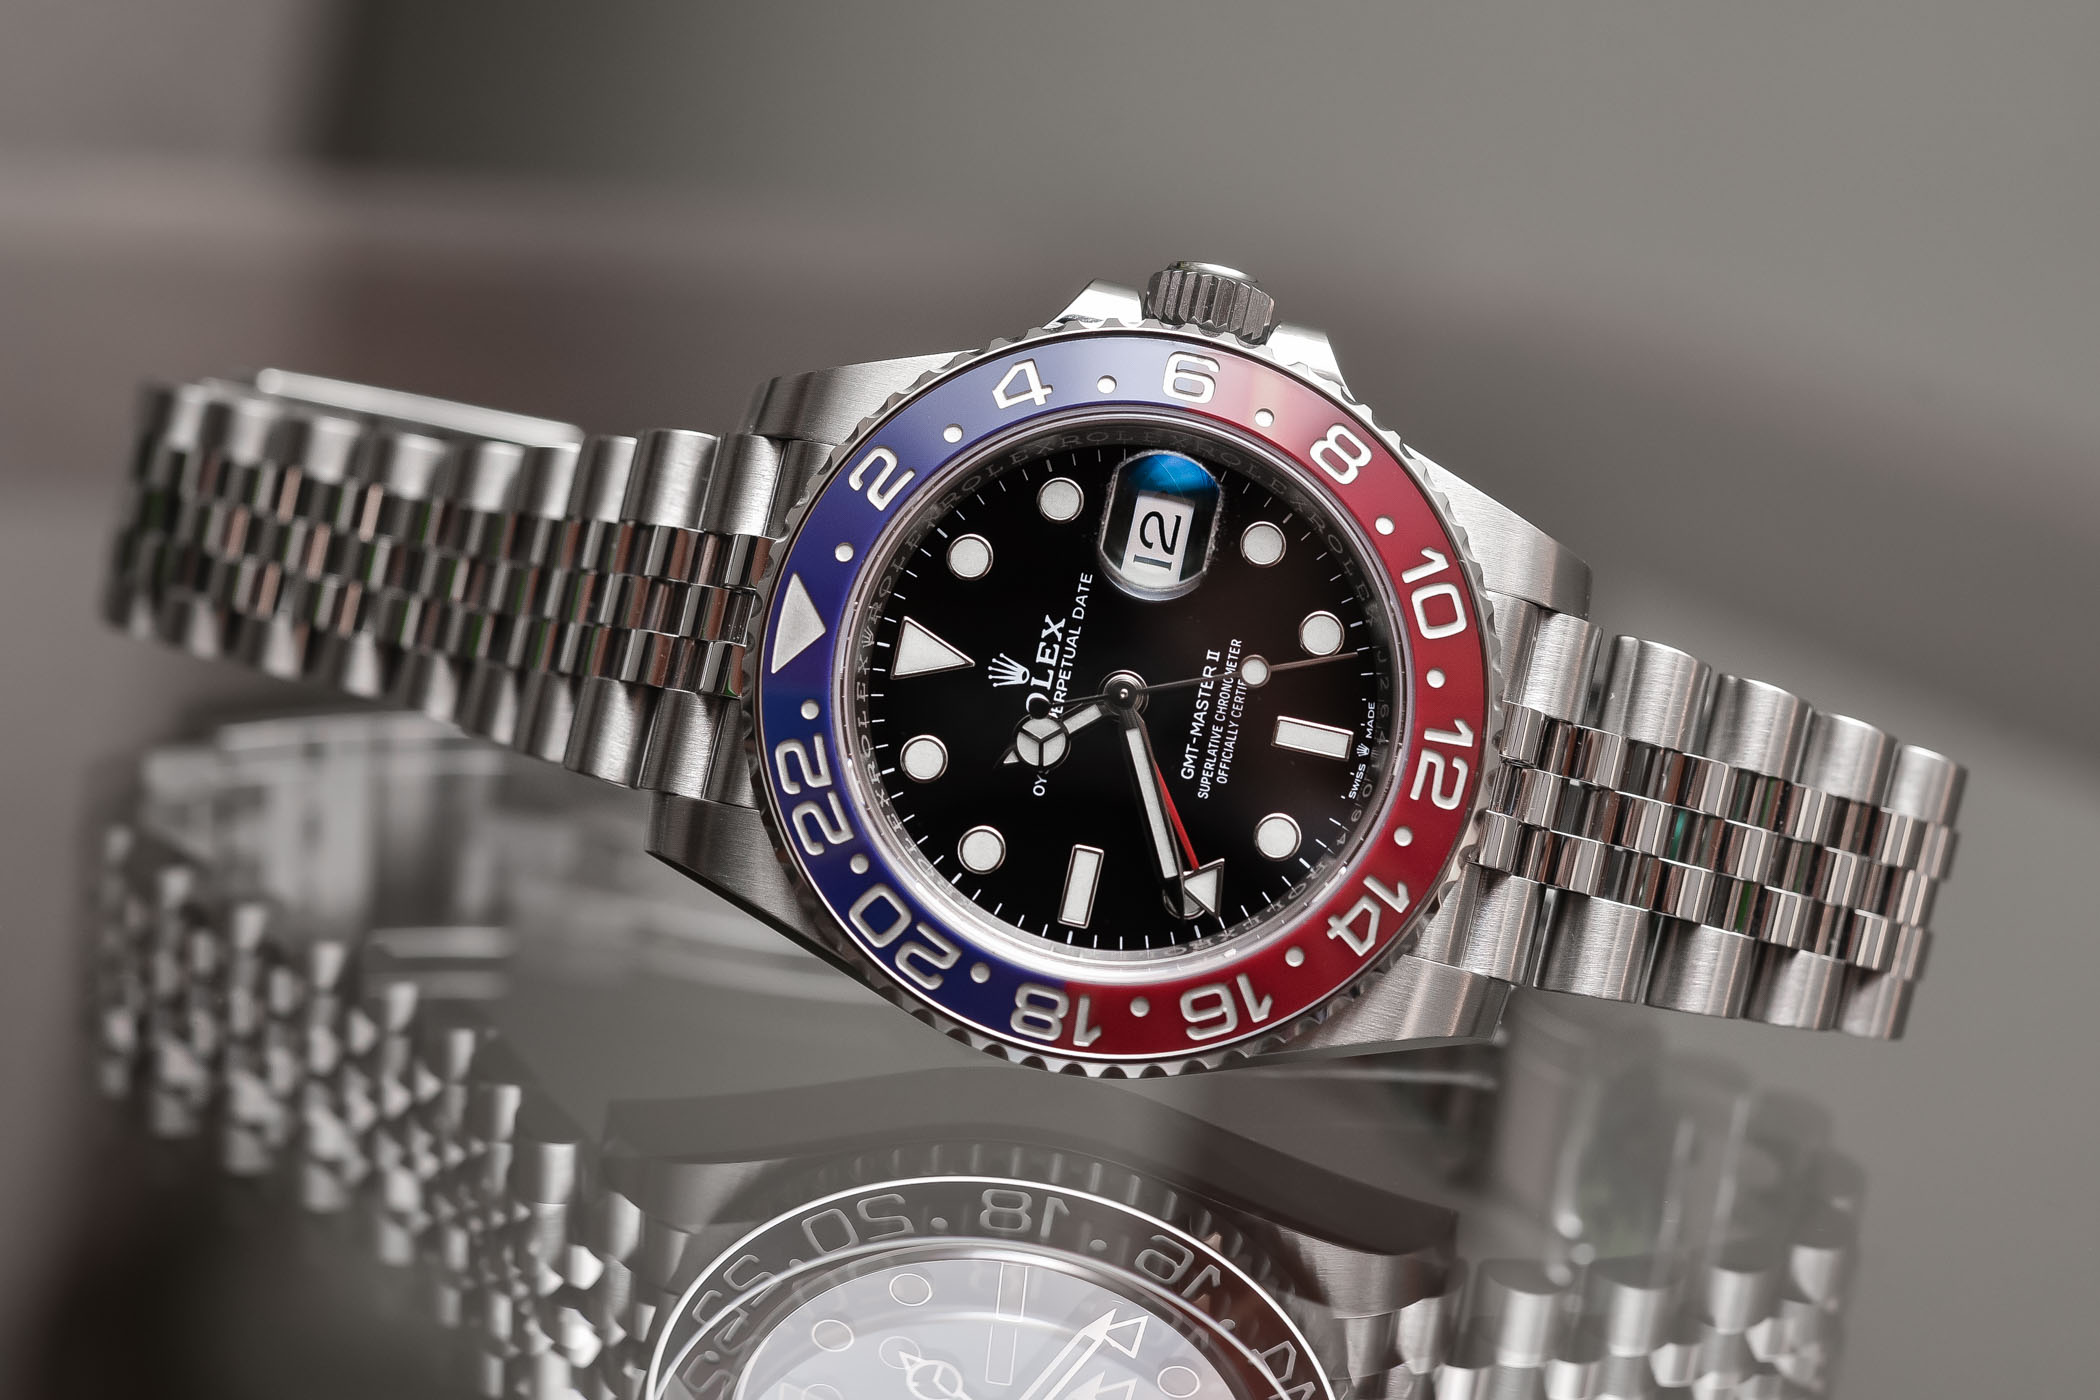 What is the Reason for the Shortage of Rolex in the Market?